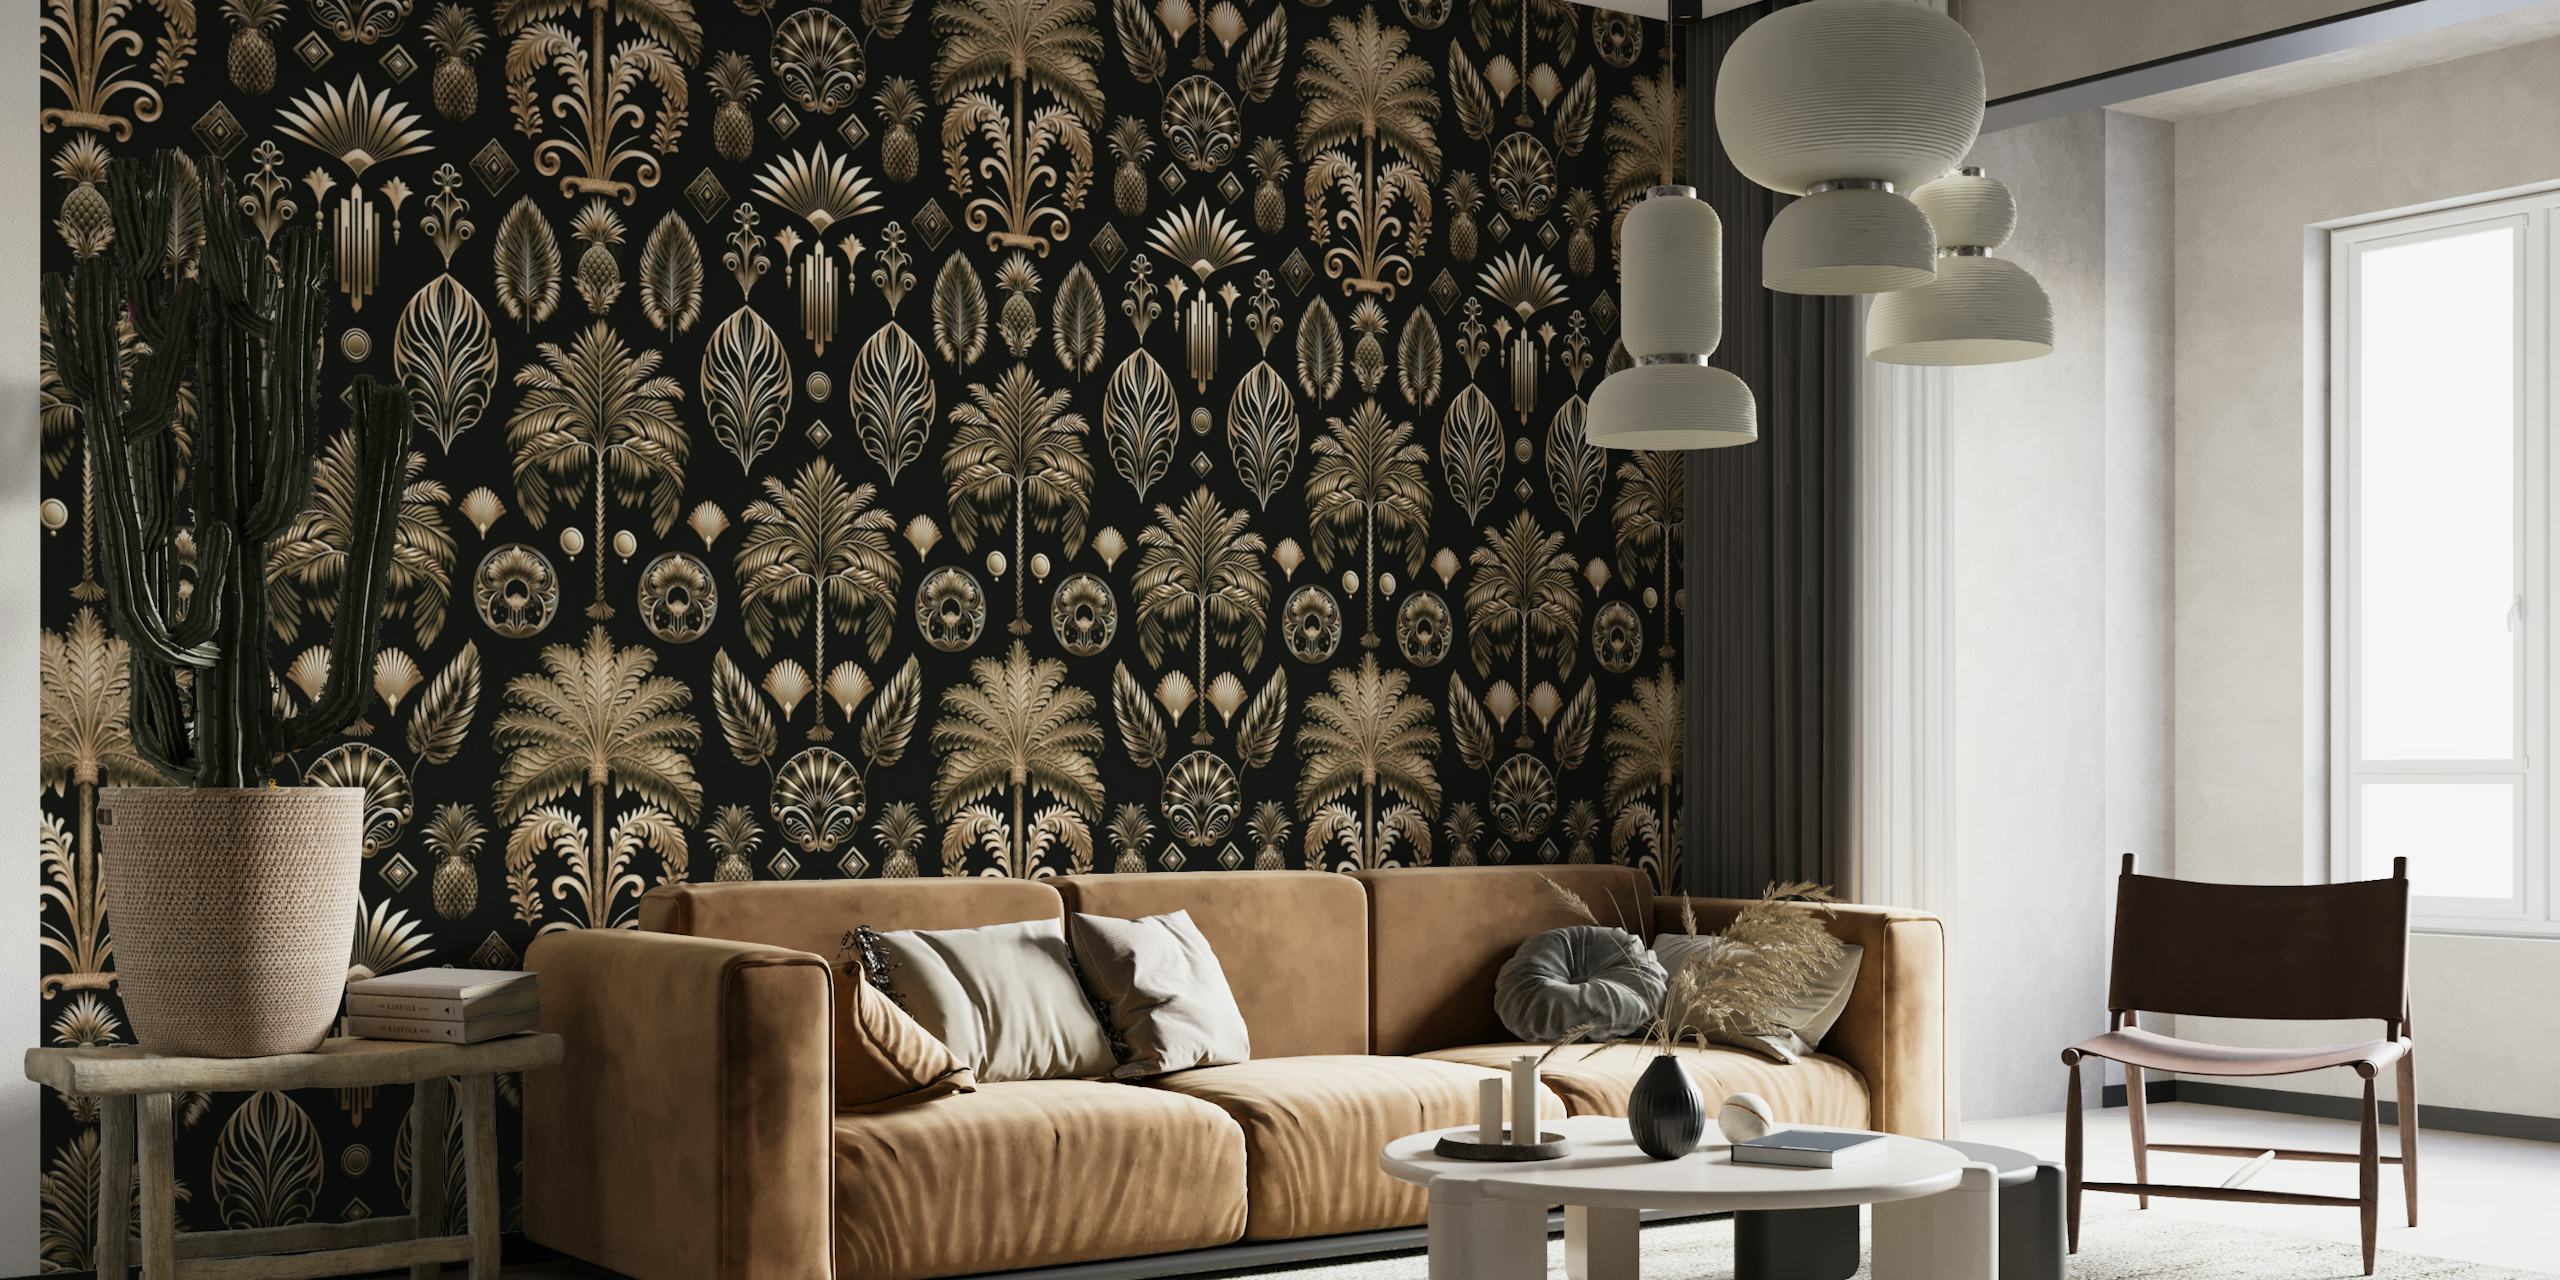 Exquisite Art Decor Design With Palm Trees And Ornamnts Gold On Black ταπετσαρία